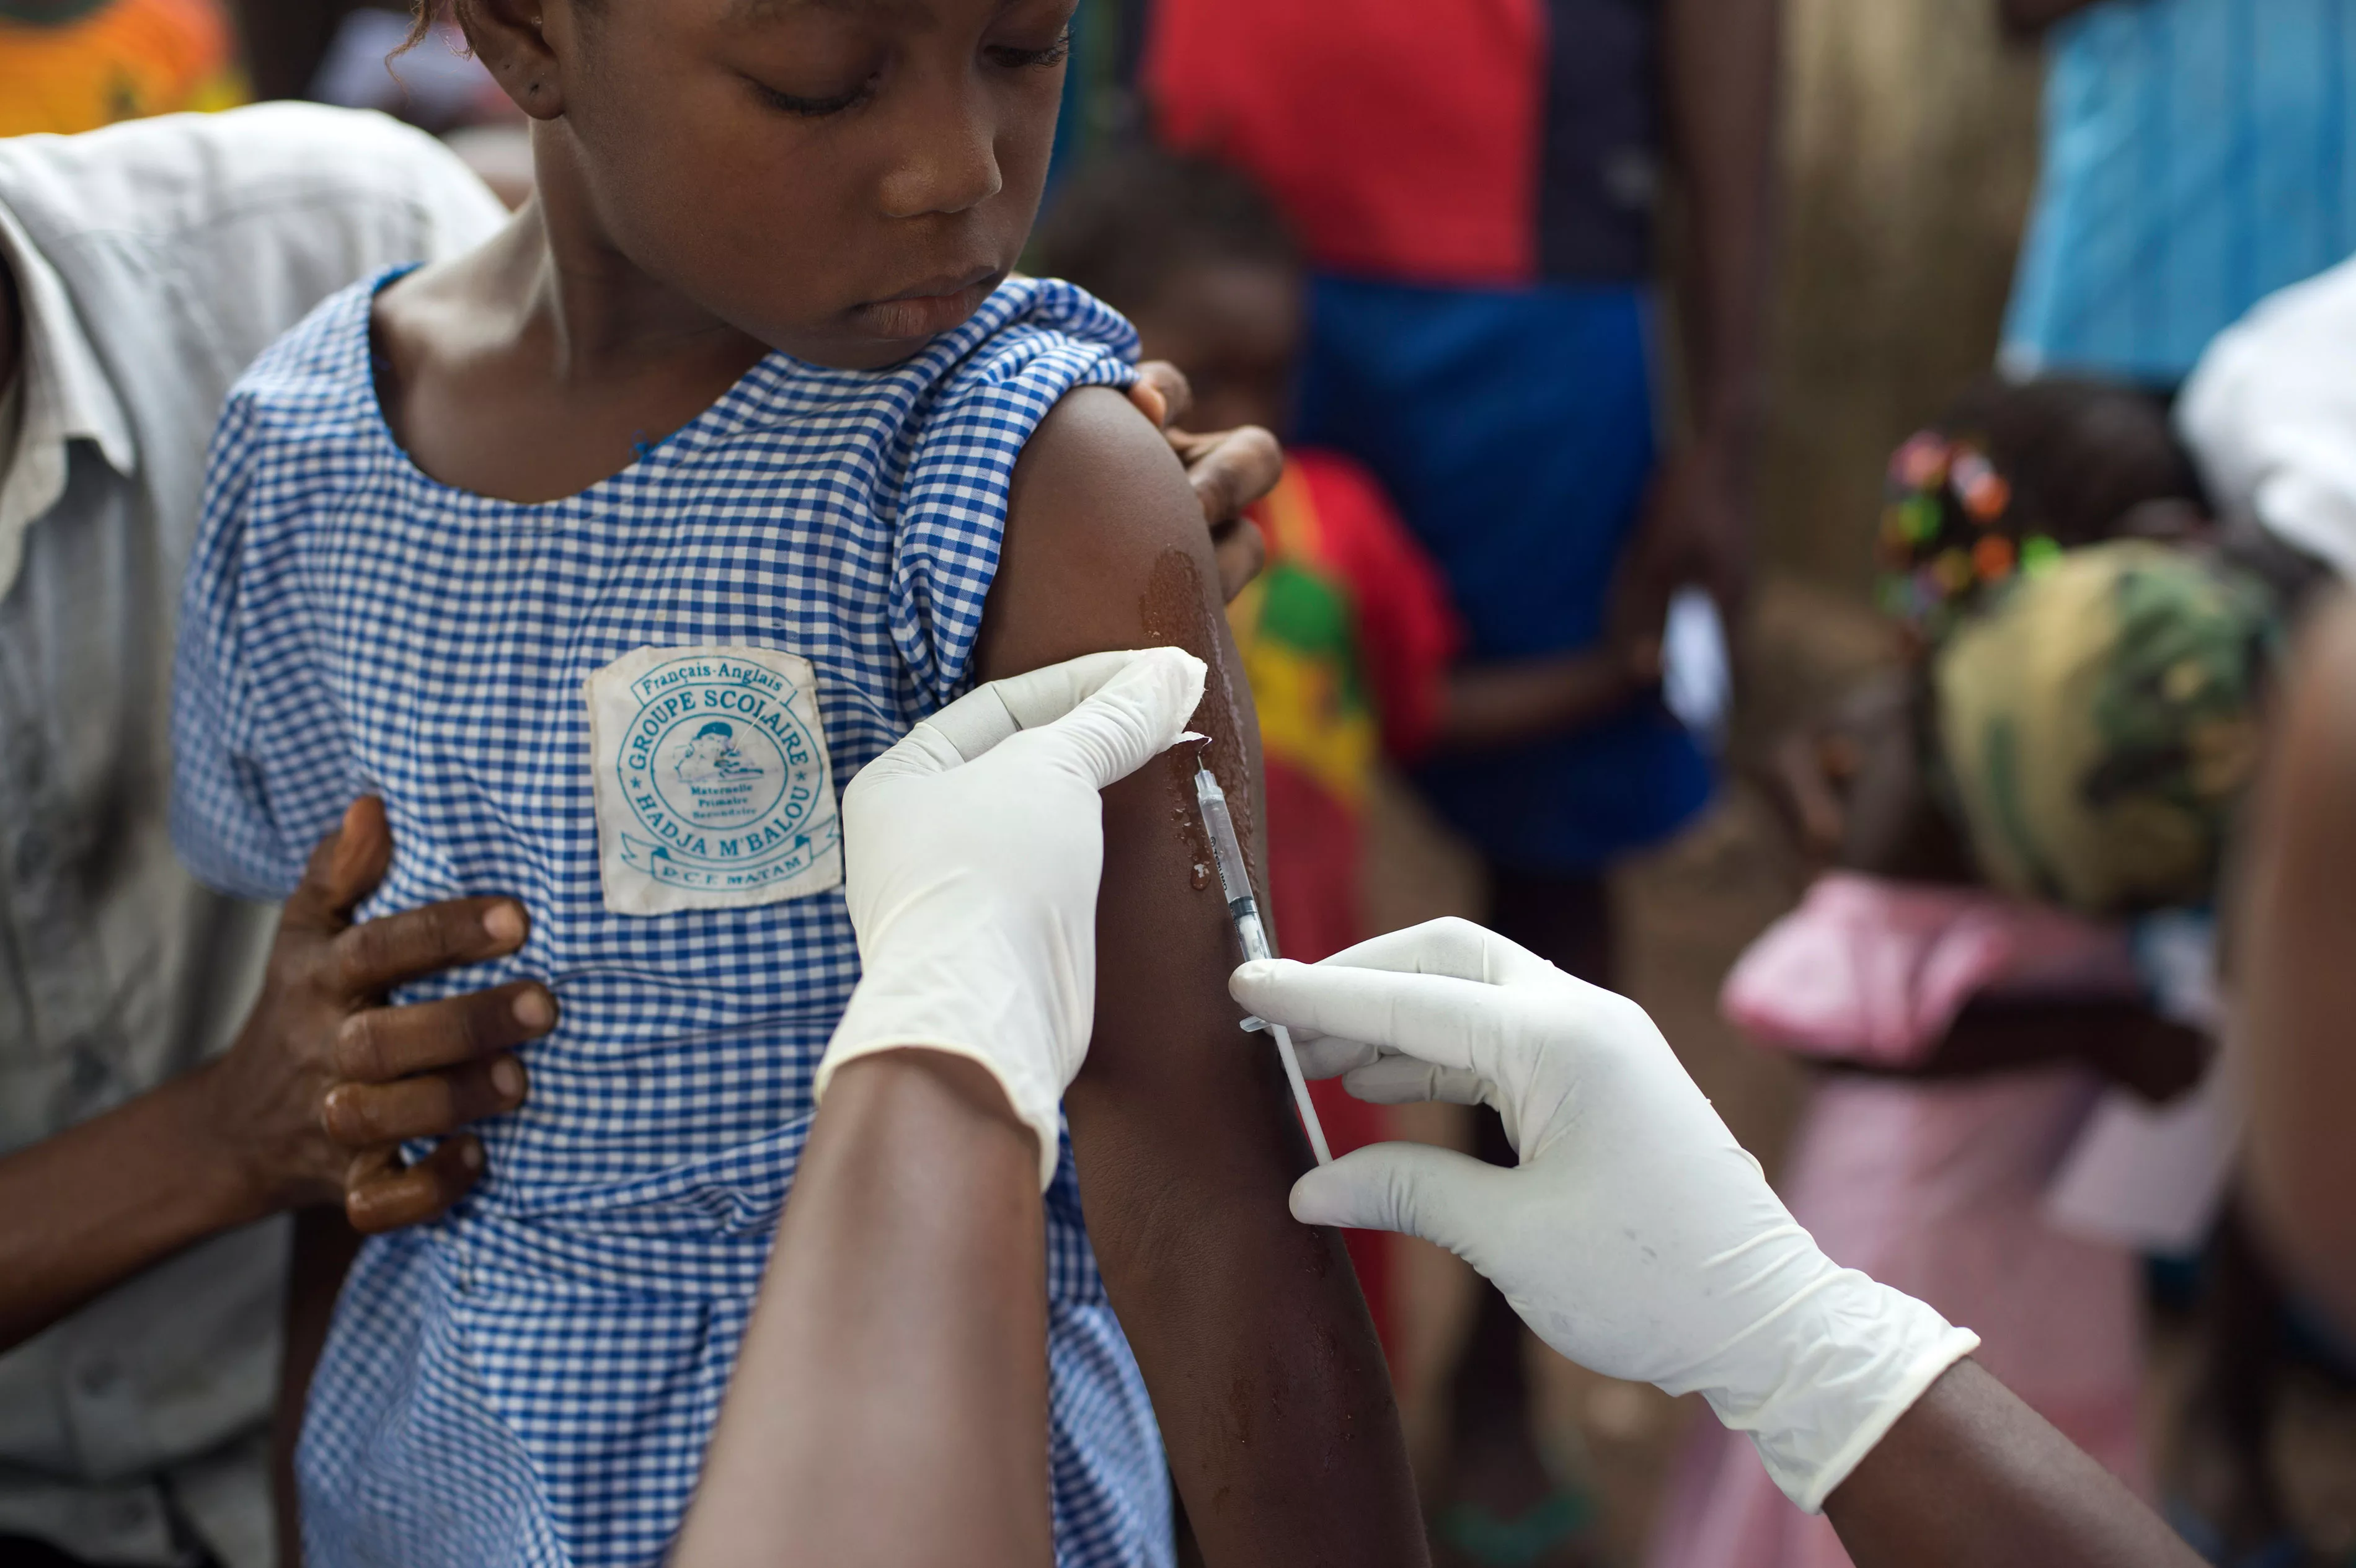 MSF launched a vaccination campaign against measles in an attempt to control the epidemic that was declared by the government of Guinea on 14 January 2014. 